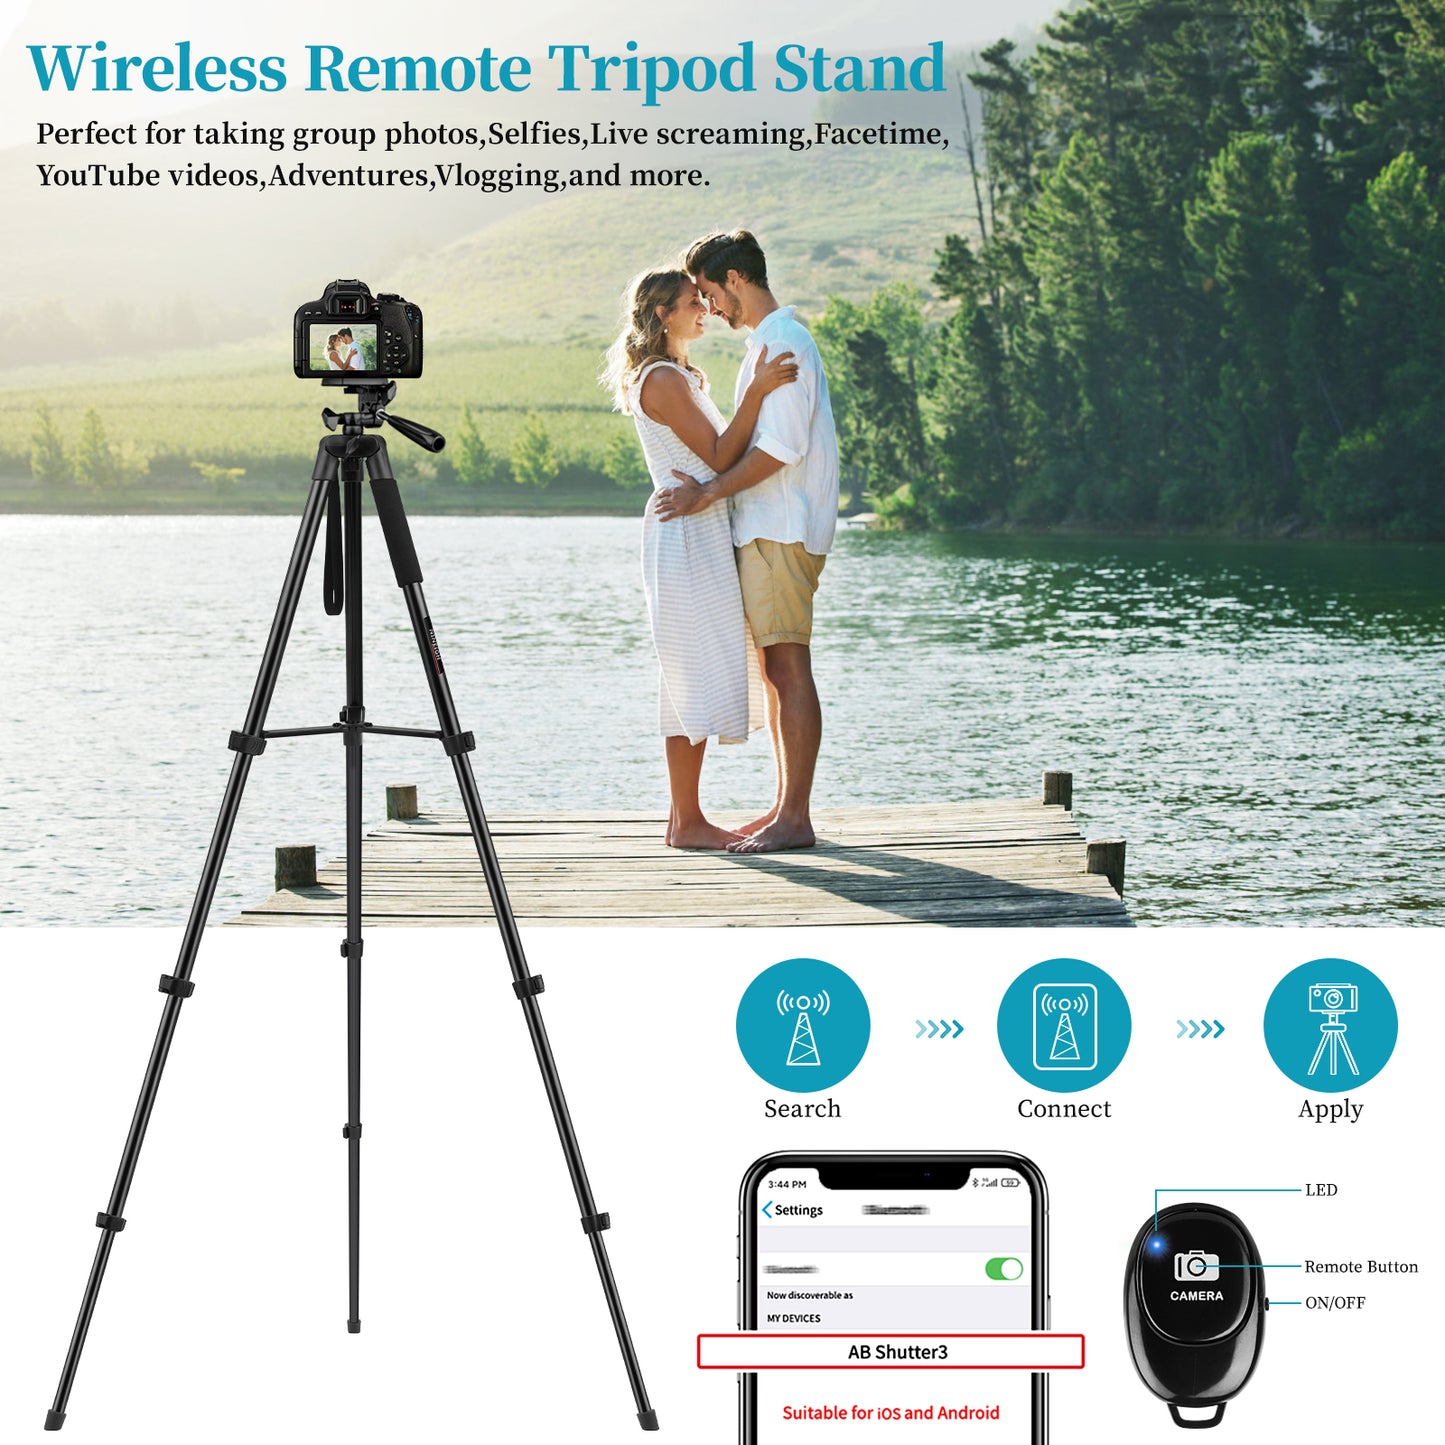 Camera Tripod 65" Phone Tripod Stand for Recording Wireless Remote Selfie Stick, Travel Tripod Camera Phone Tablet for Video Recording Selfies Vlog, Compatible with iPhone Android iPad Camera(USA)